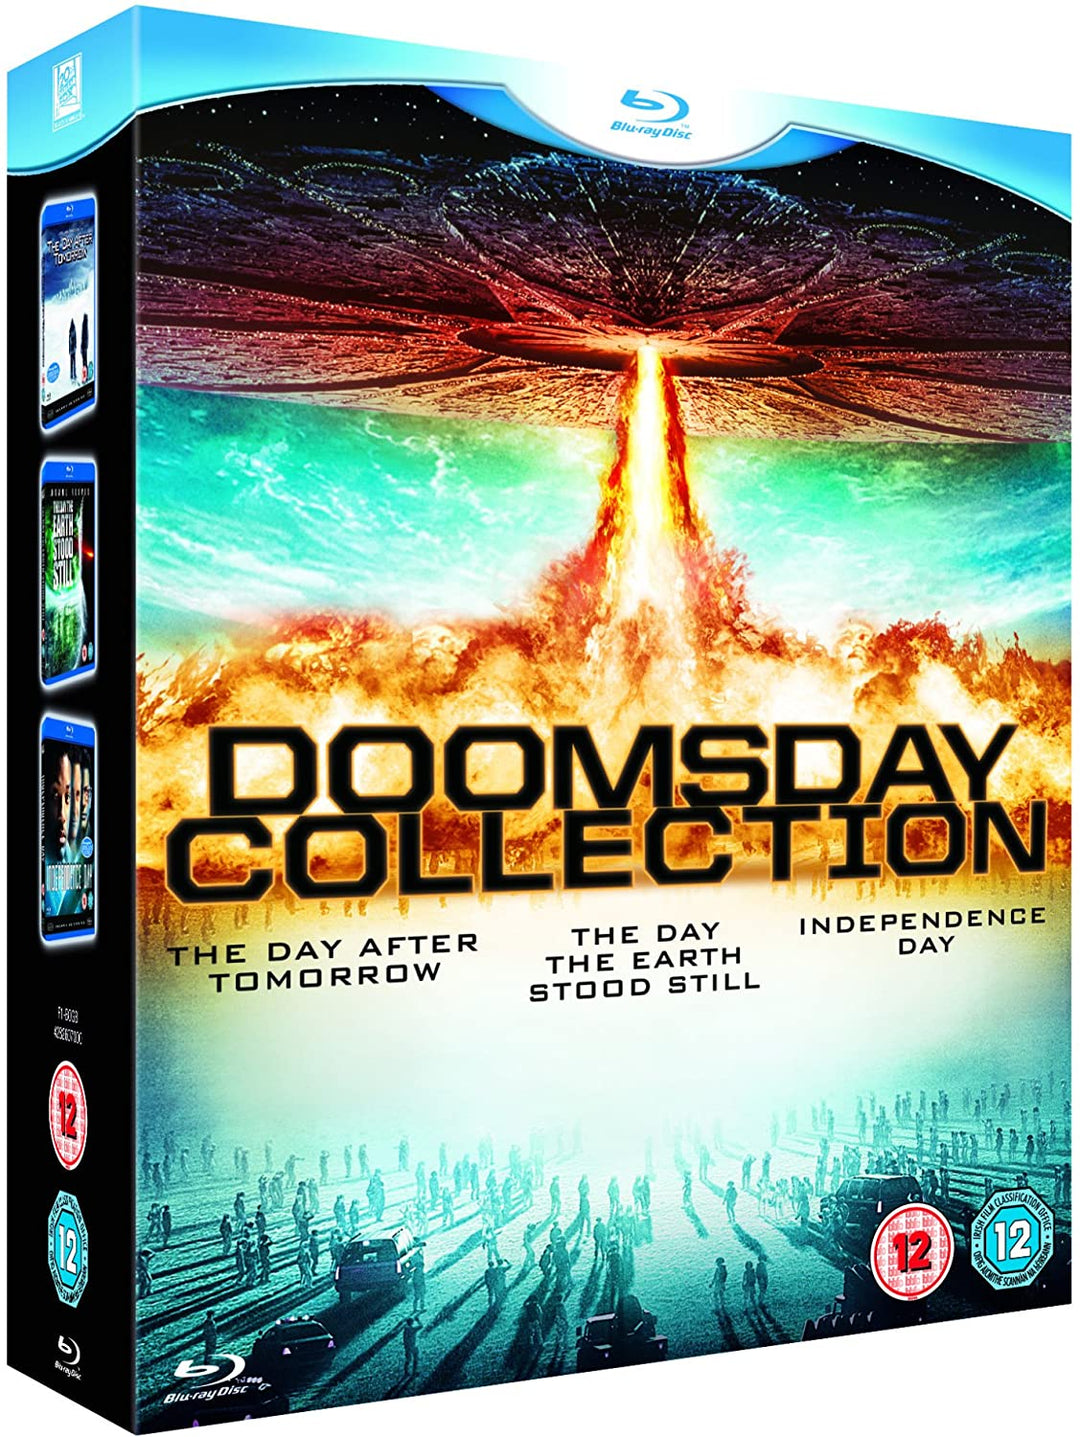 Doomsday Collection [Blu-ray] [1996]